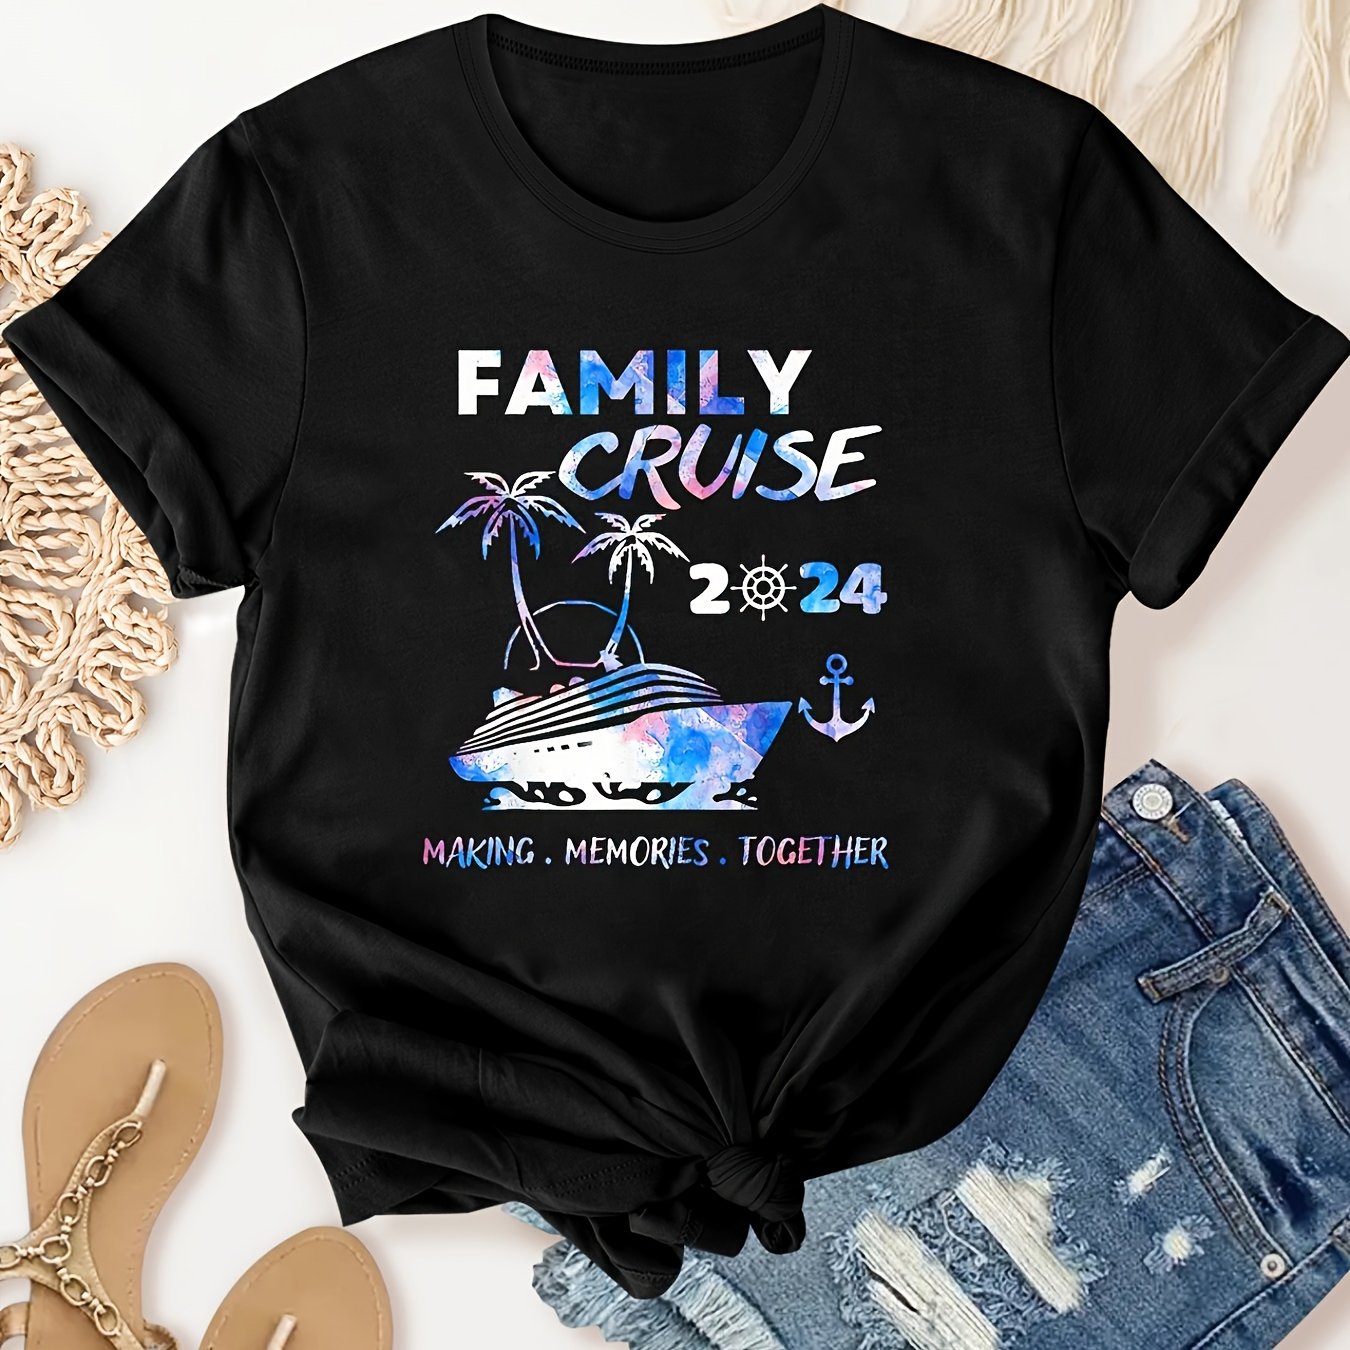 Clearance! Graphic Tees for Women Western Shirts for Women Cute Teacher  Outfits Aesthetic Clothes for Teen Girls Trendy Shirts Funny Graphic Tees  for Women Cruise Wear for Women 2023 Ya-White 